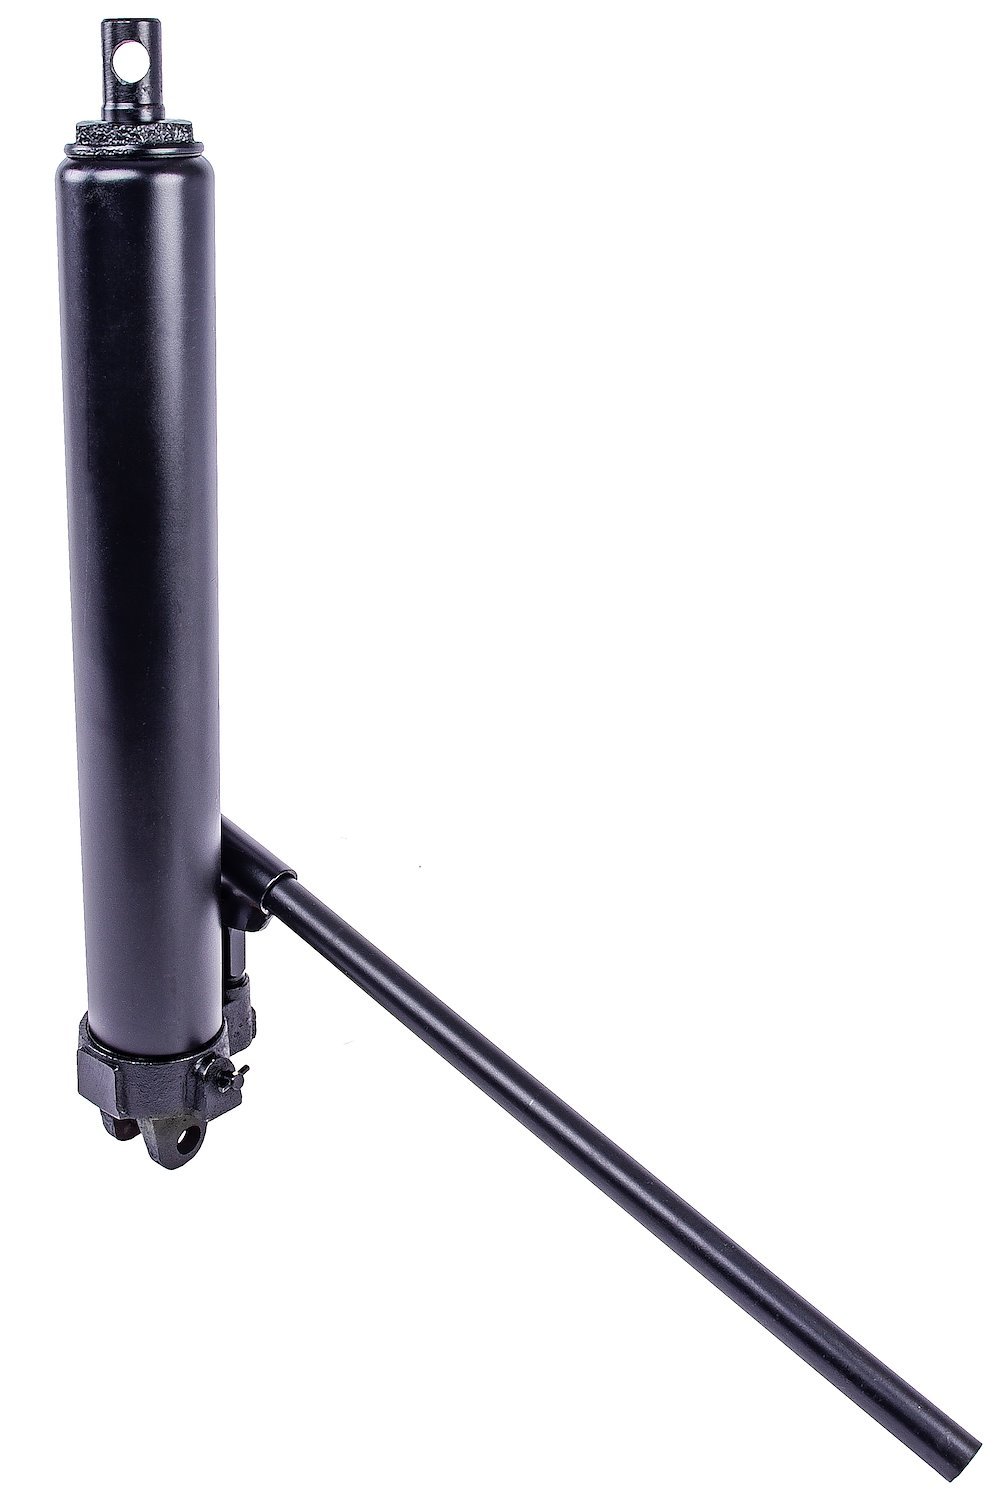 Replacement Hydraulic Ram for JEGS Hydraulic Hitch-Mounted Crane (555-81039)